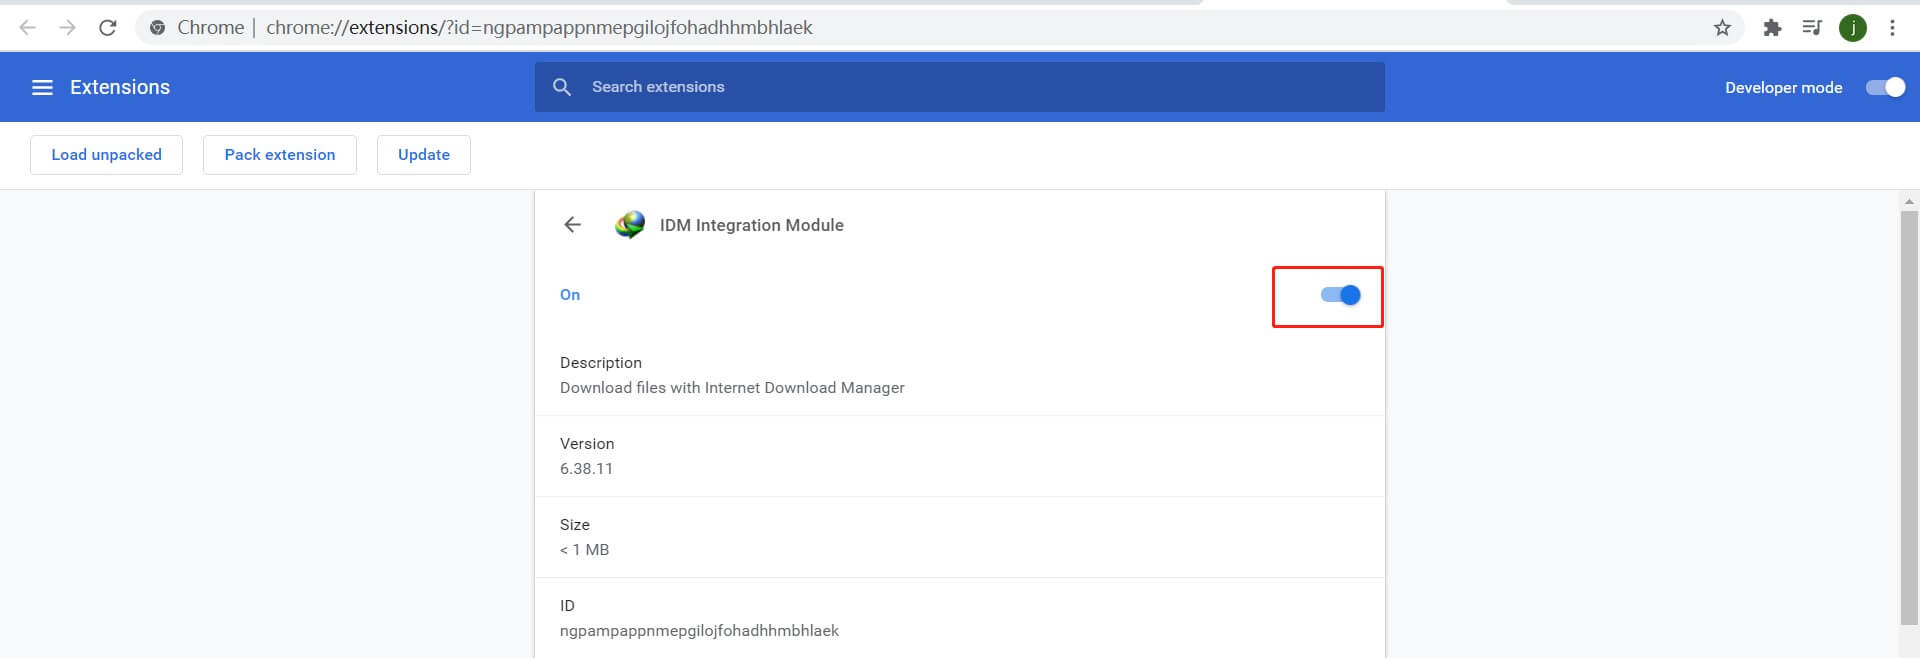 advanced browse integration is enabled in idm manager